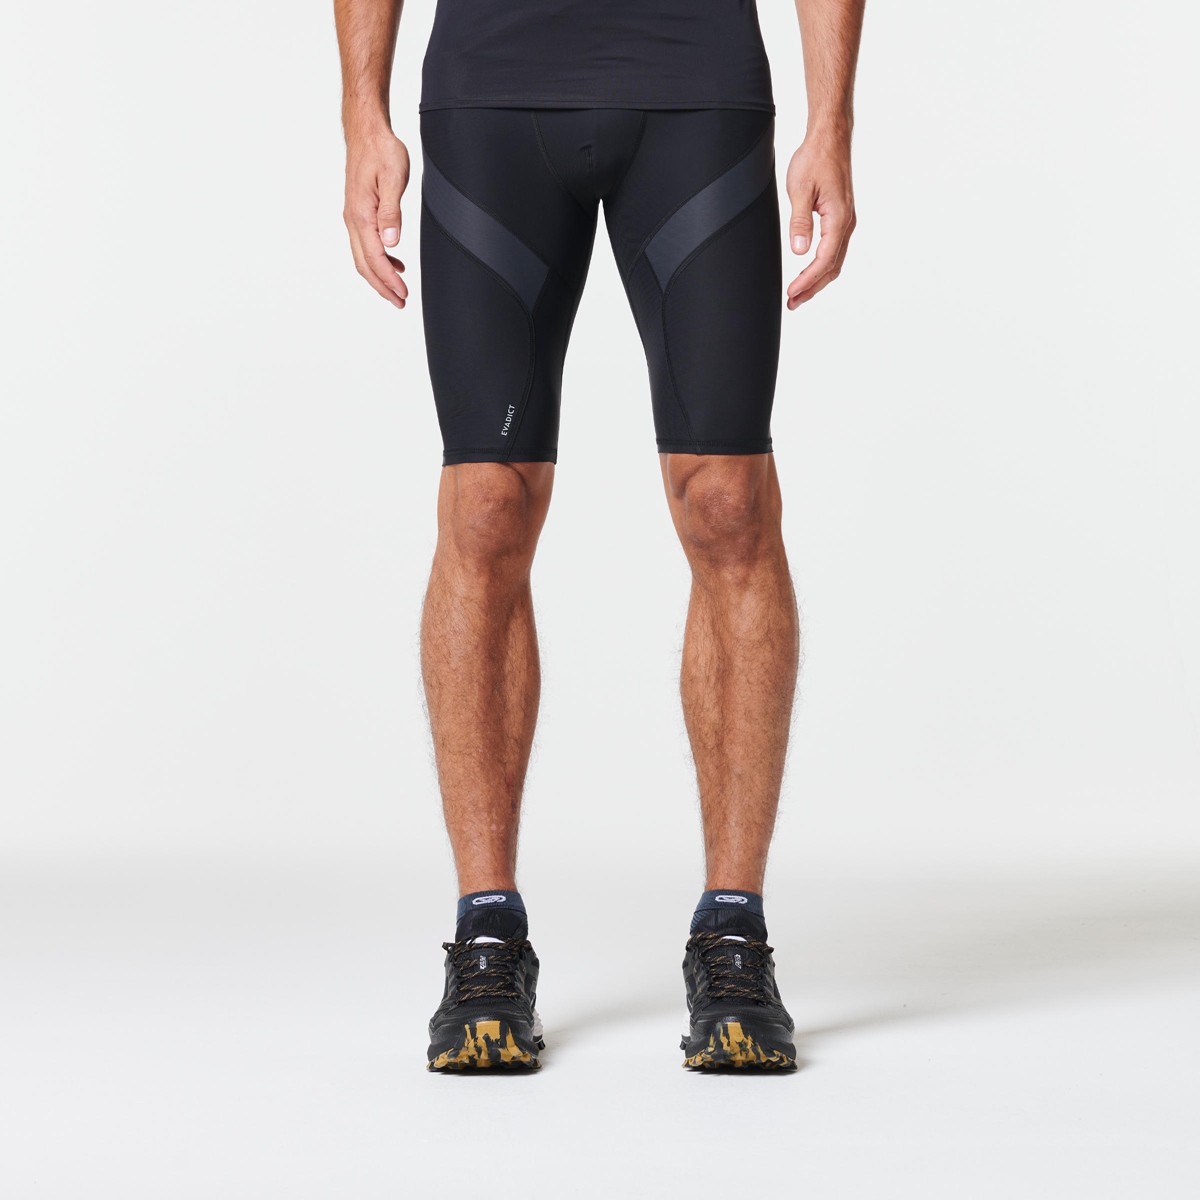 12 Best Compression Running Shorts For 2023